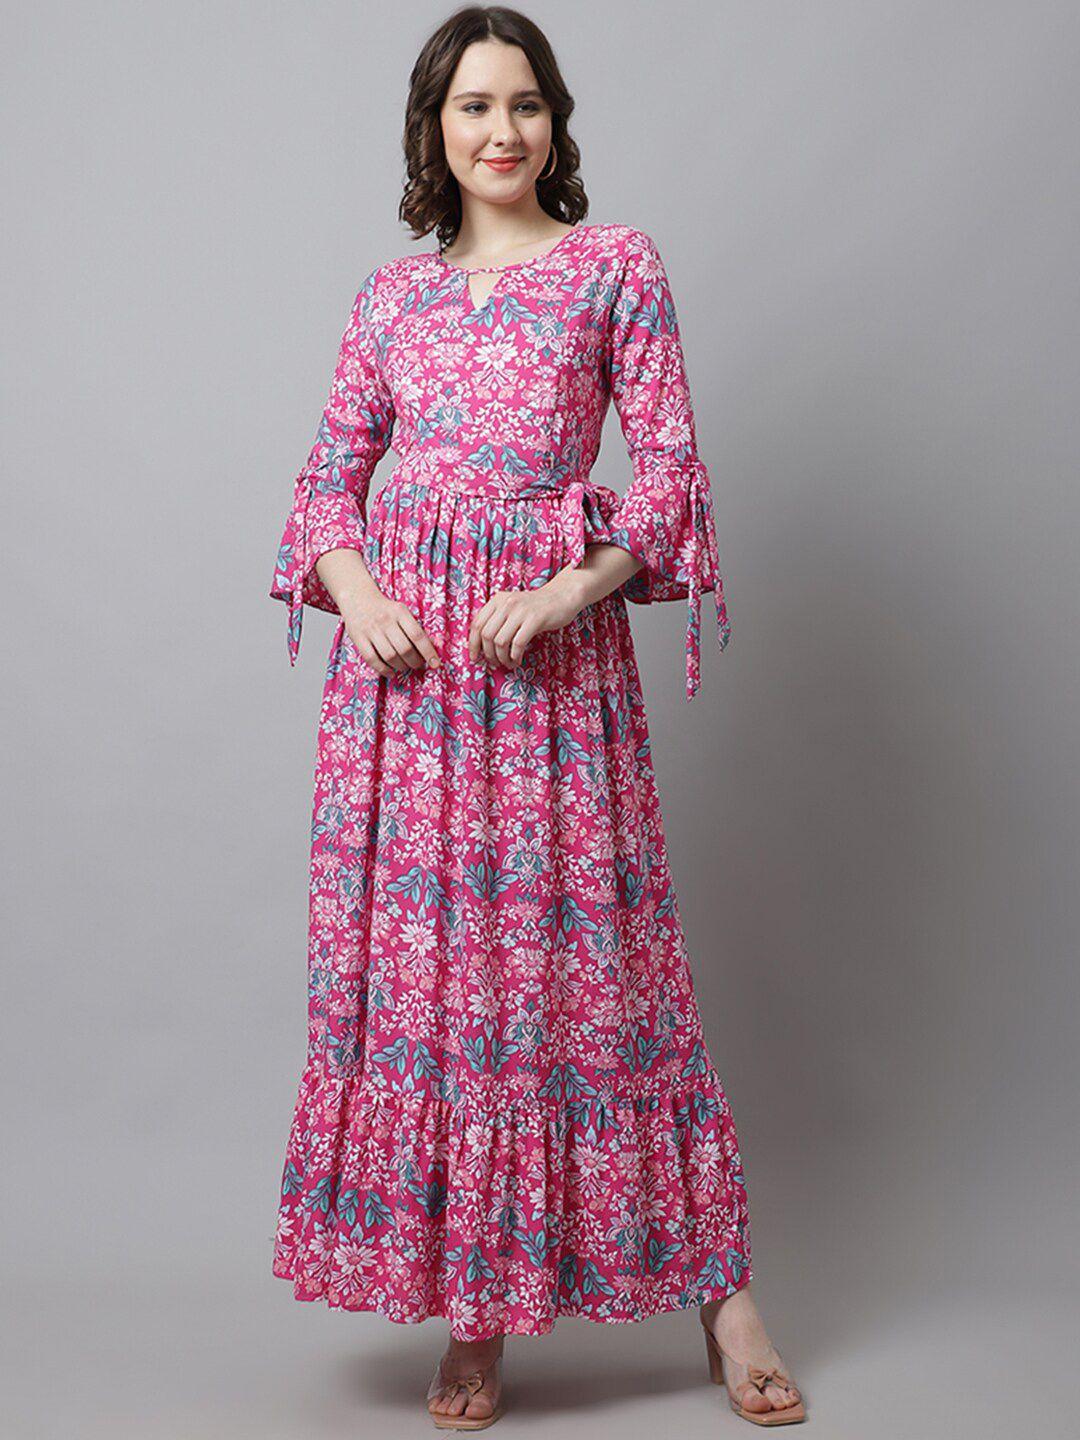 frempy pink floral printed maternity maxi dress